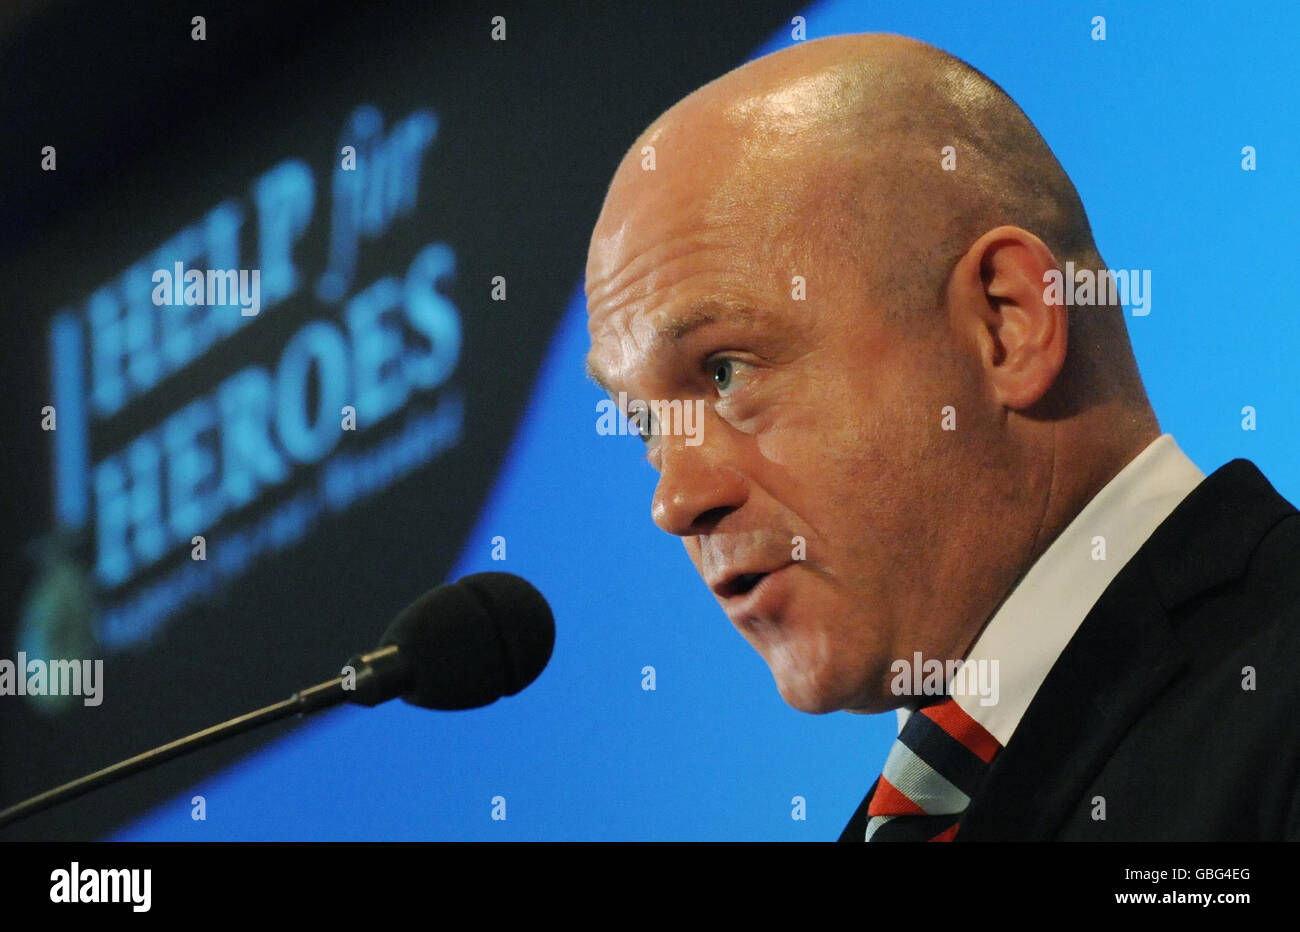 Actor Ross Kemp speaks at the first Annual Review of the charity 'Help For Heroes' which helps soldiers wounded in current conflicts, in London today. Stock Photo